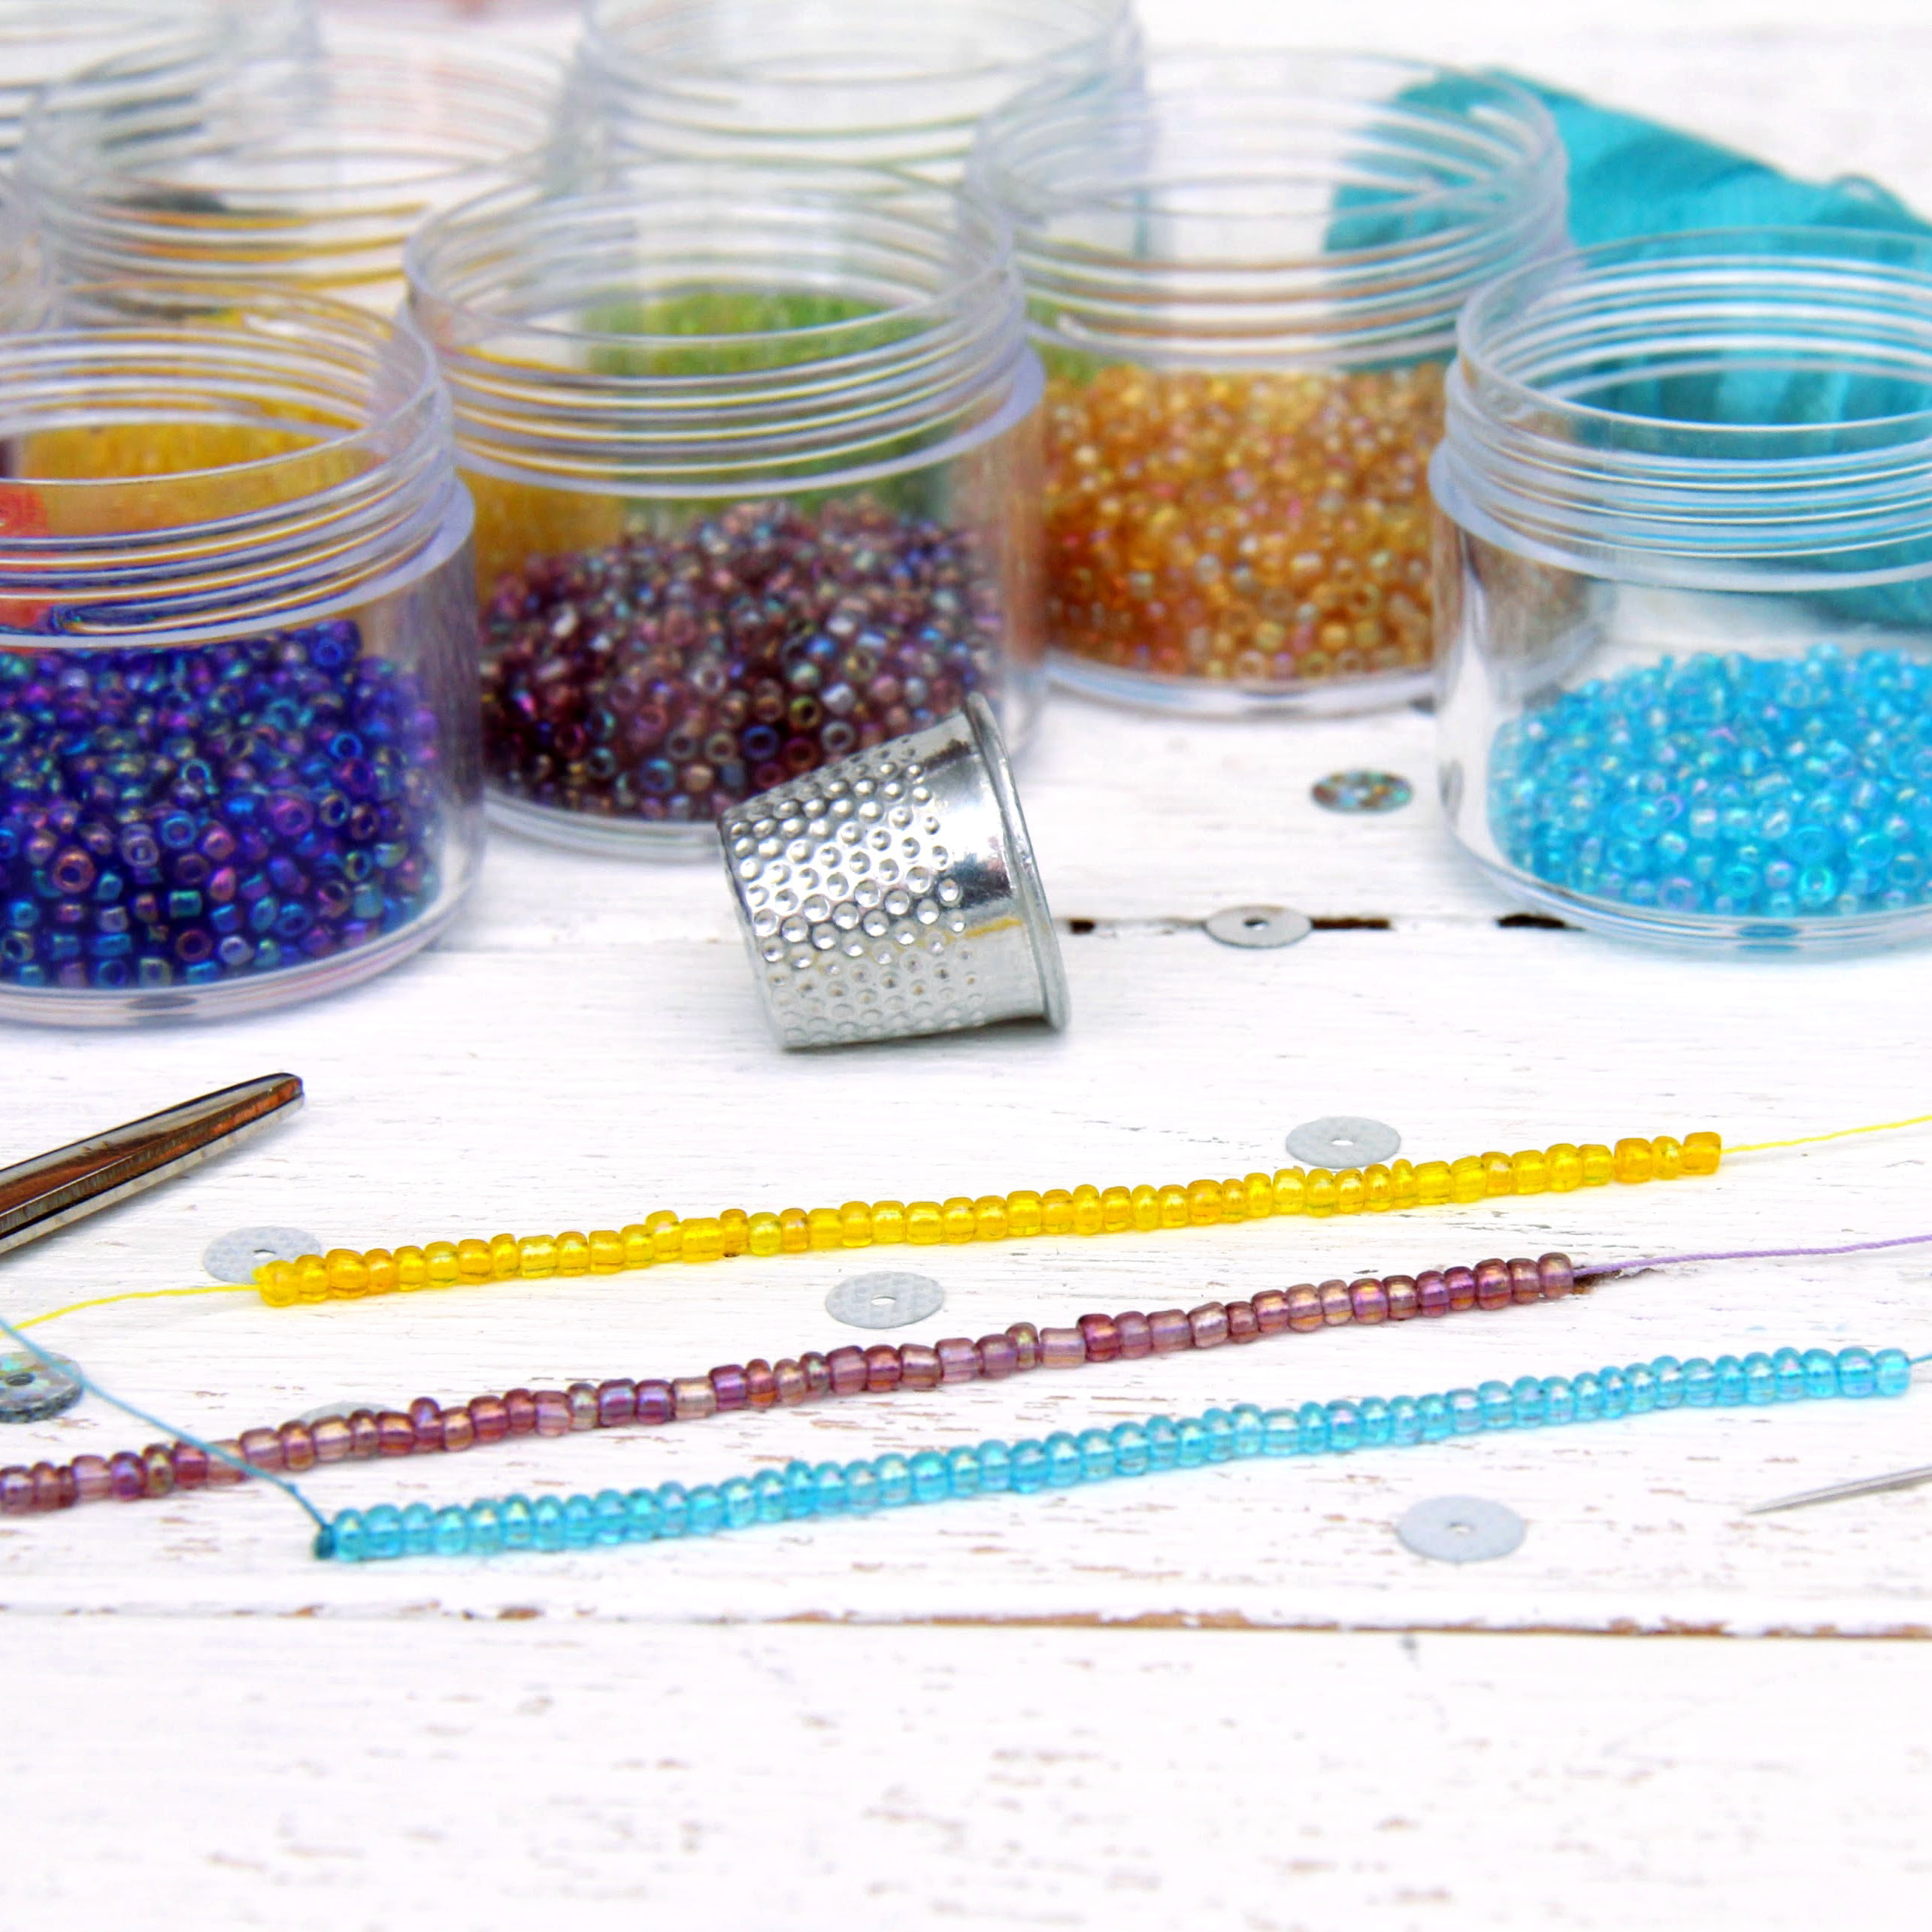 100 Grams 1/4lb Glass Seed Beads 12/0 (2mm) Round Smooth Loose Beads